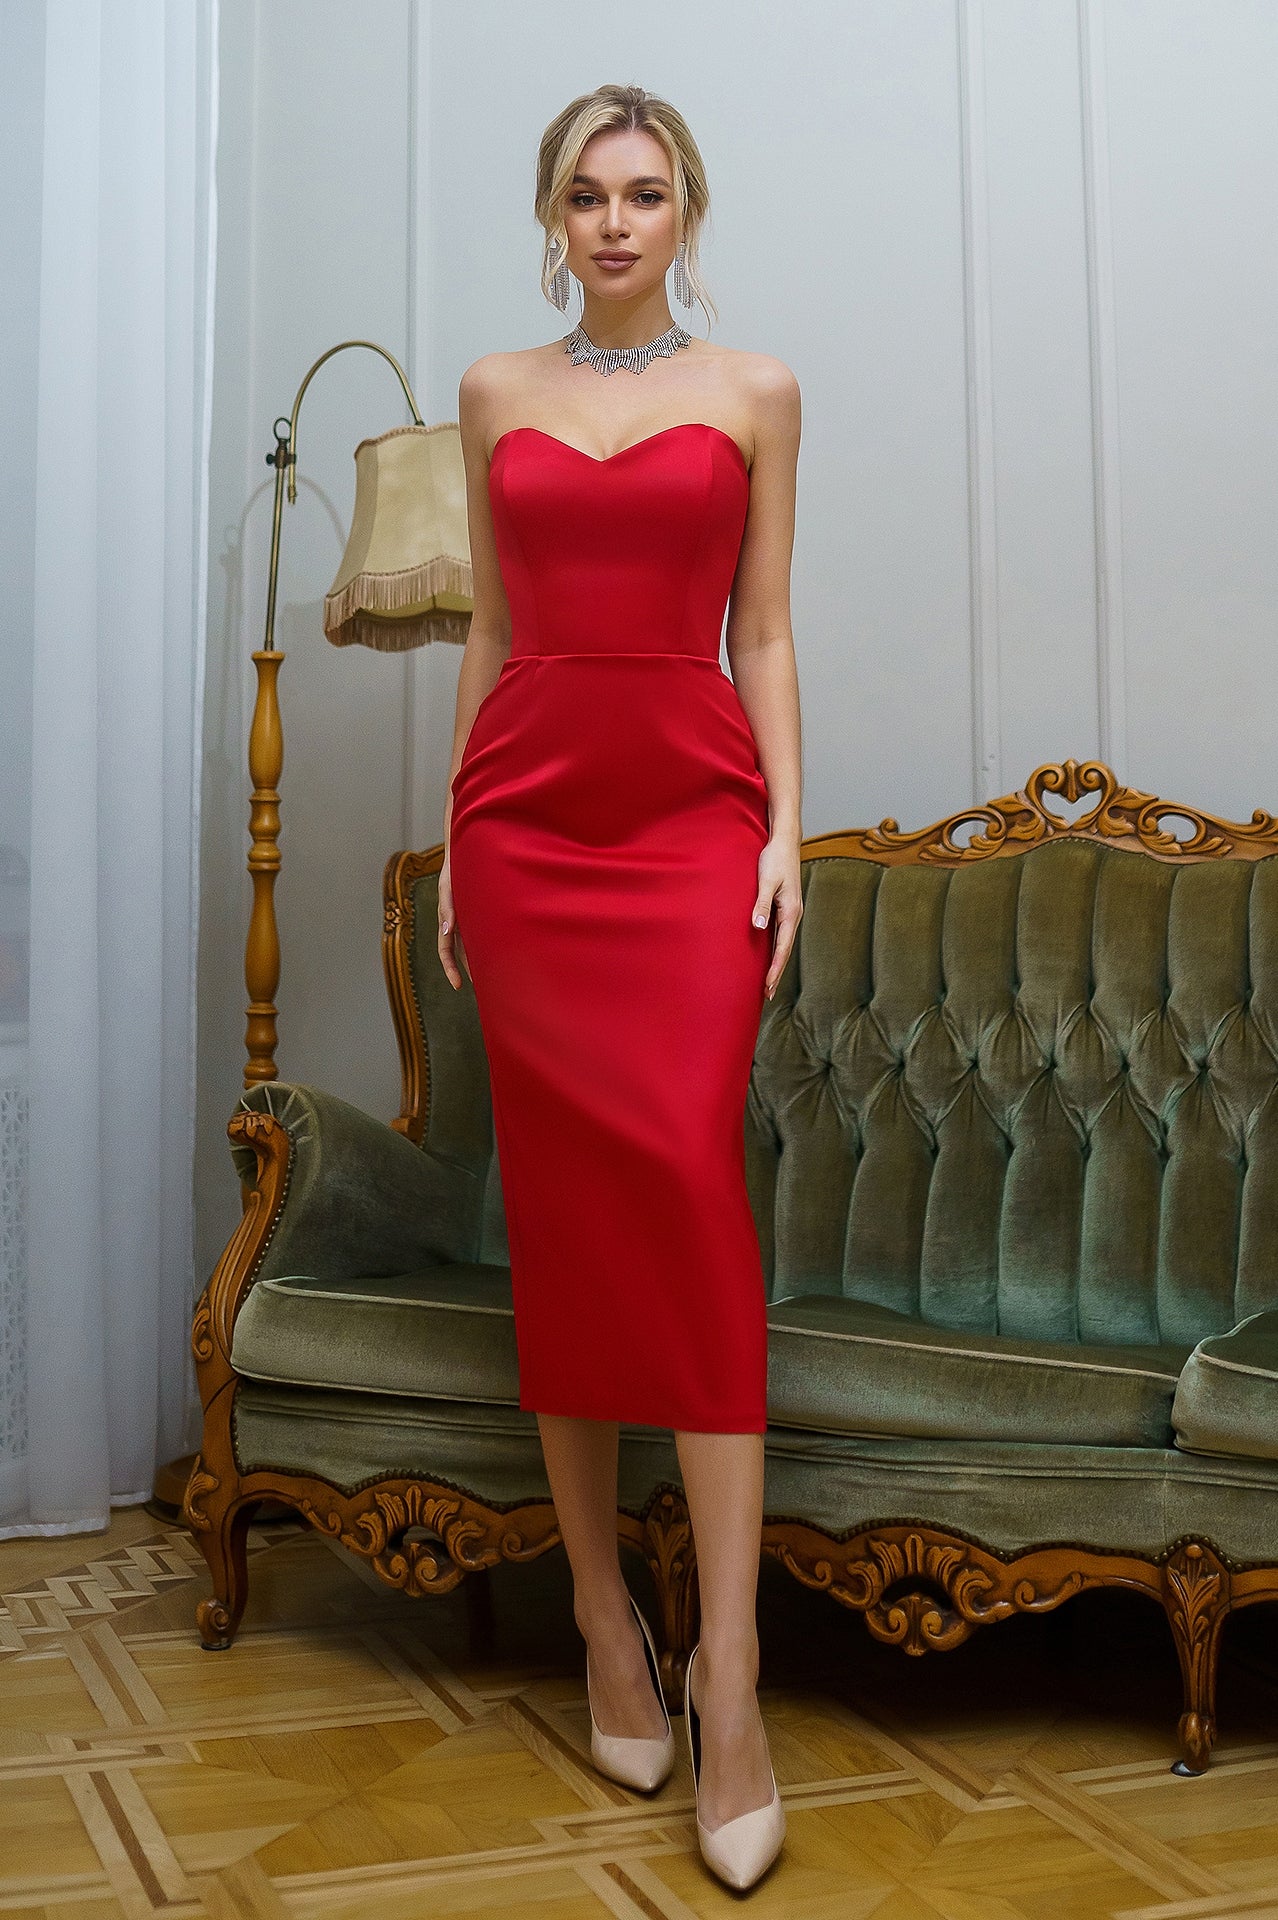 Red Satin Corseted Strapless Dress